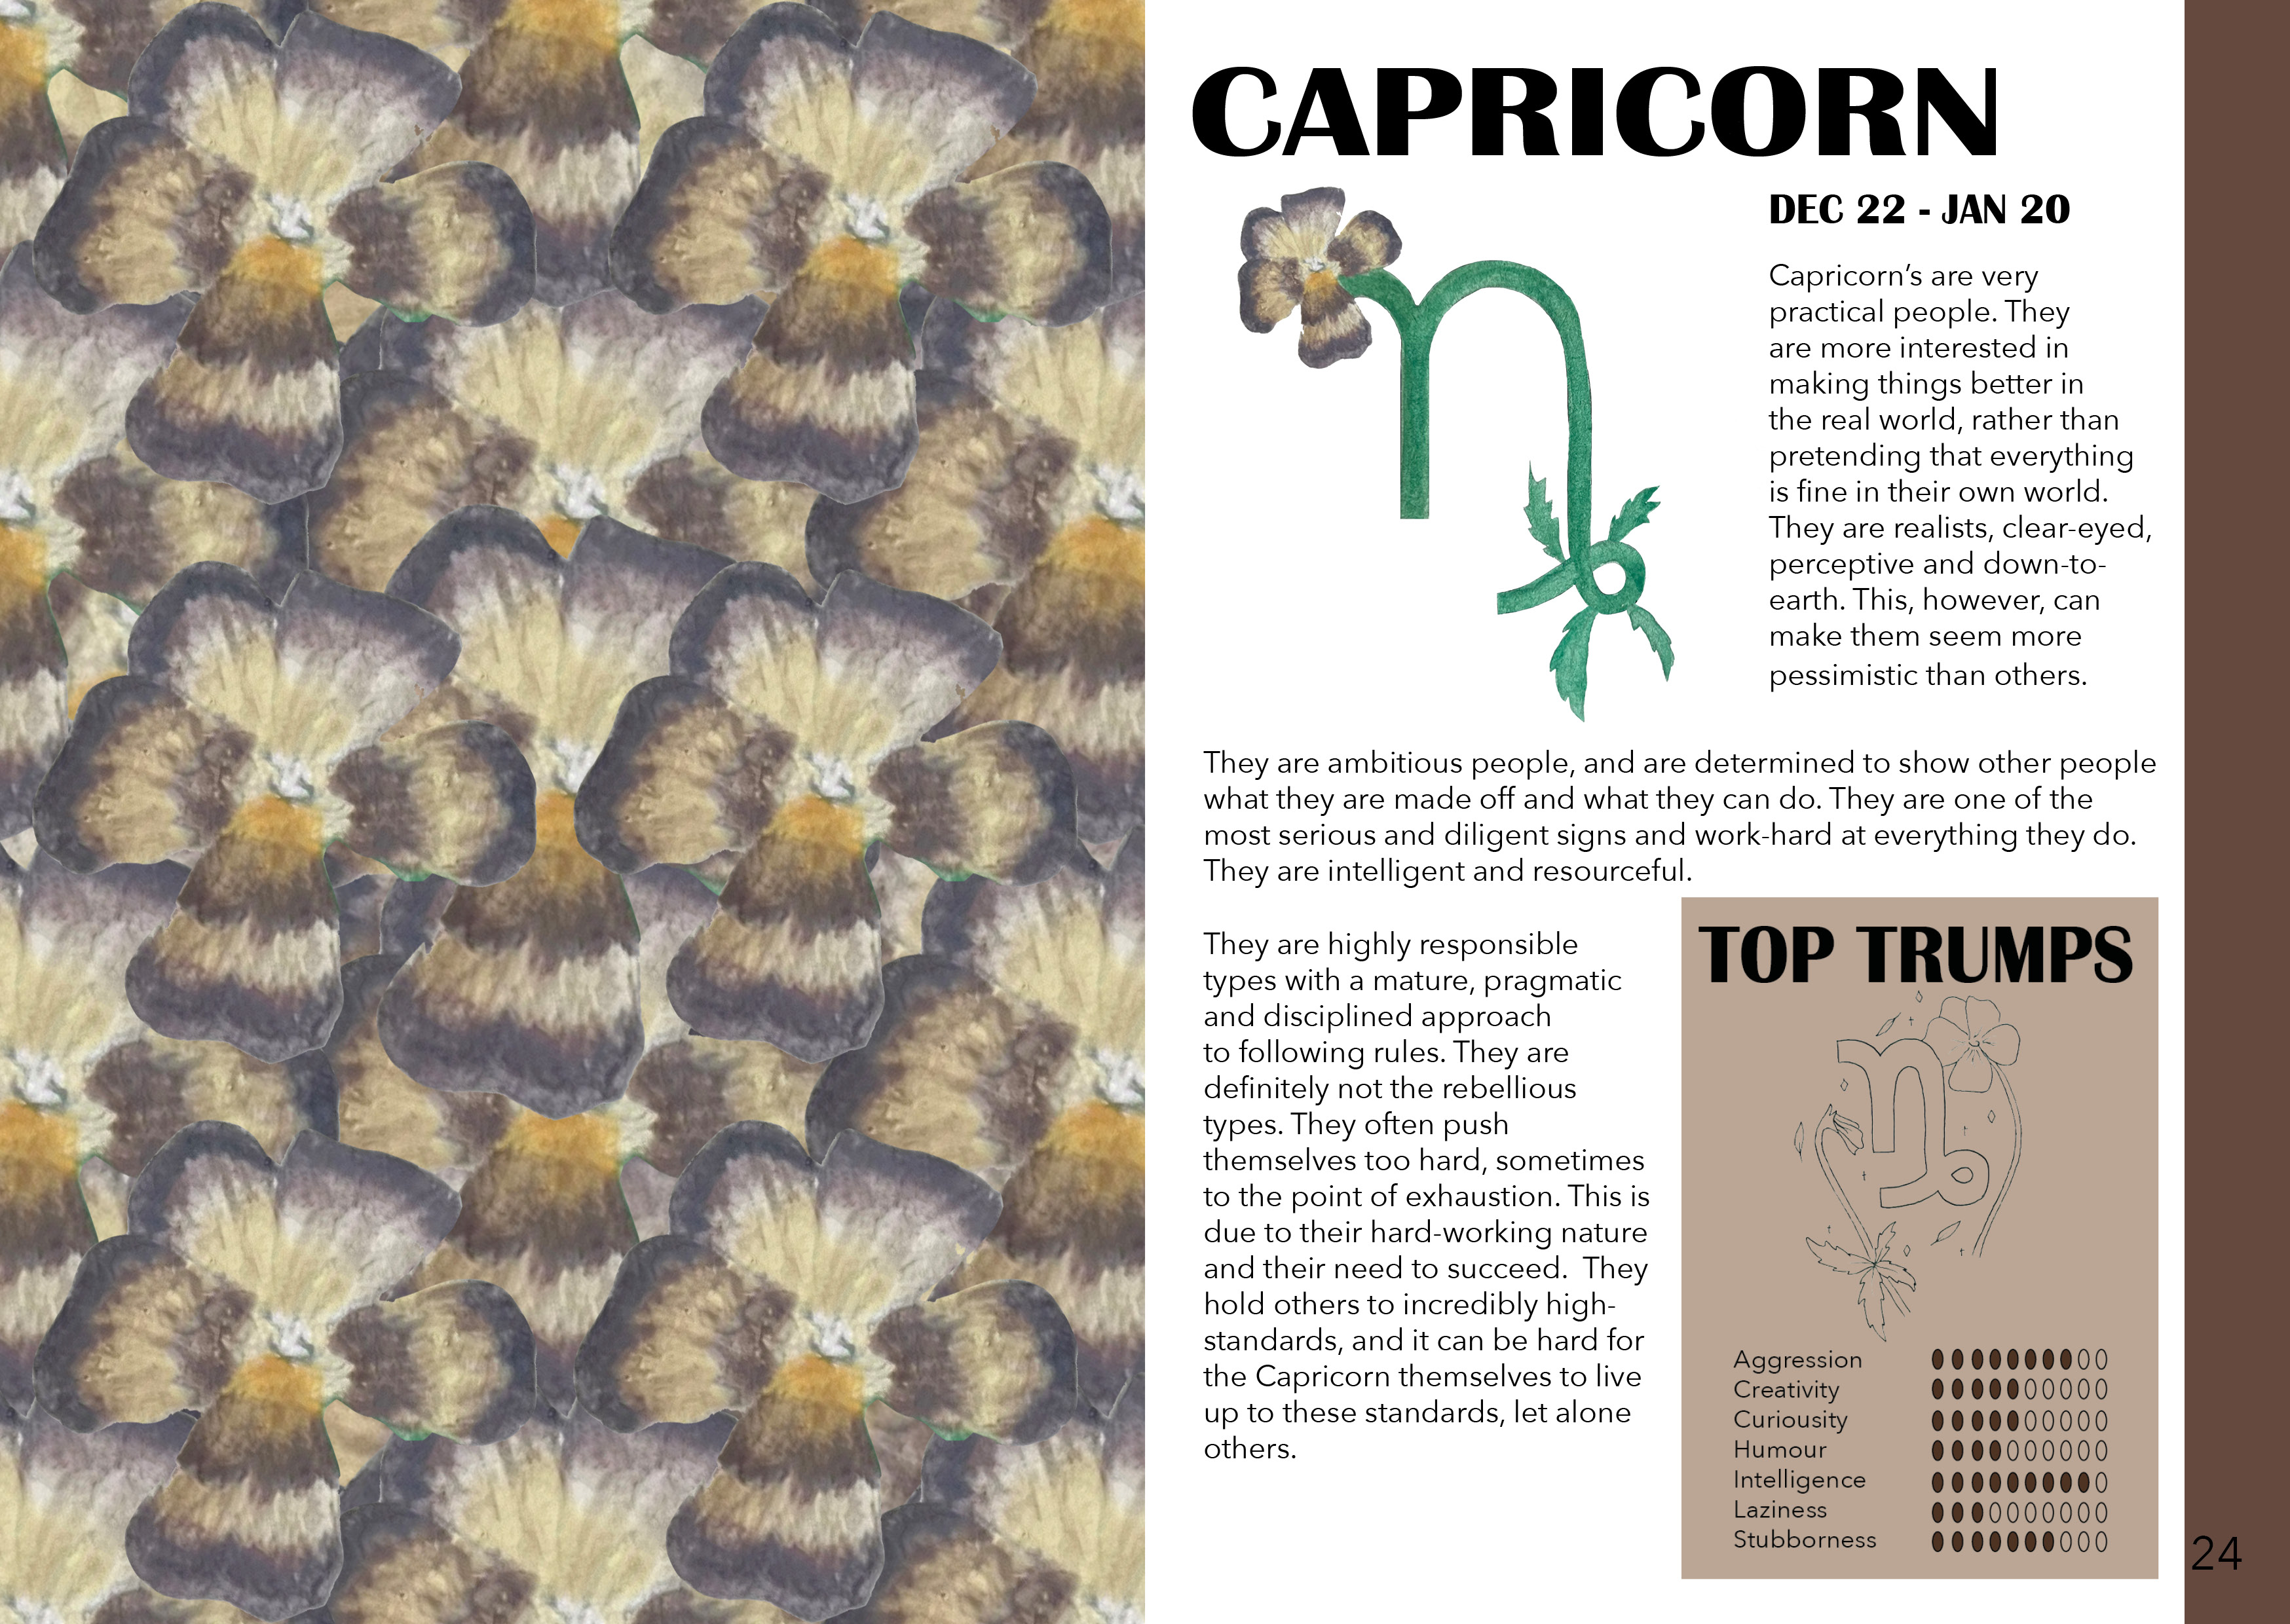 BA Illustration work by Amelia Spalding showing information about the zodiac sign, Capricorn, with a repeat pattern of the sign.